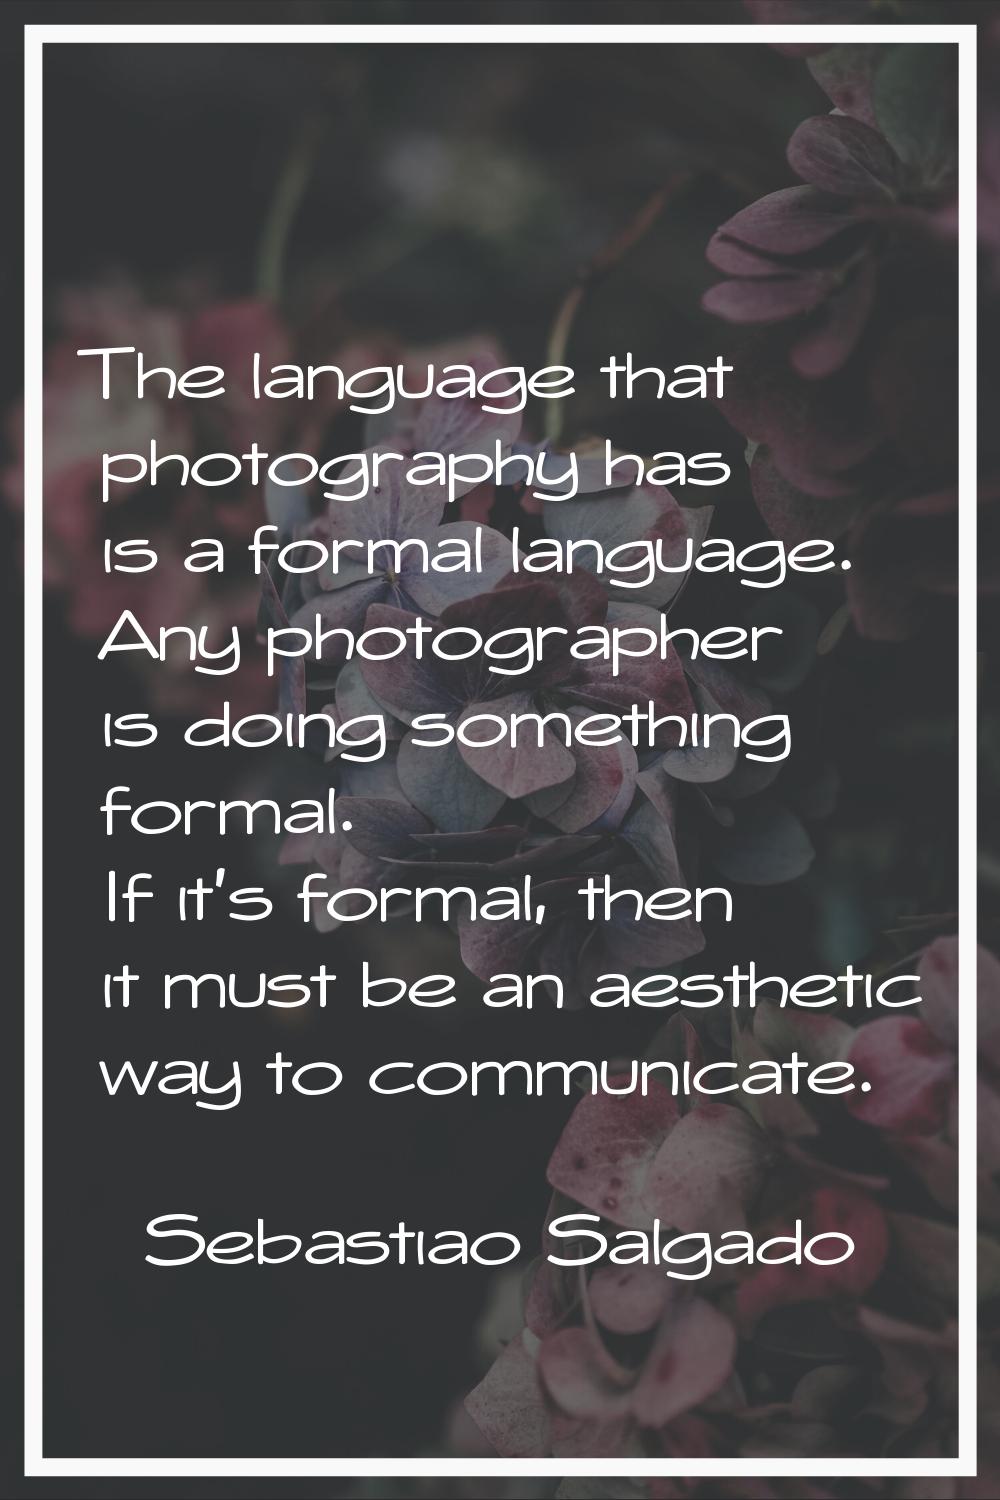 The language that photography has is a formal language. Any photographer is doing something formal.